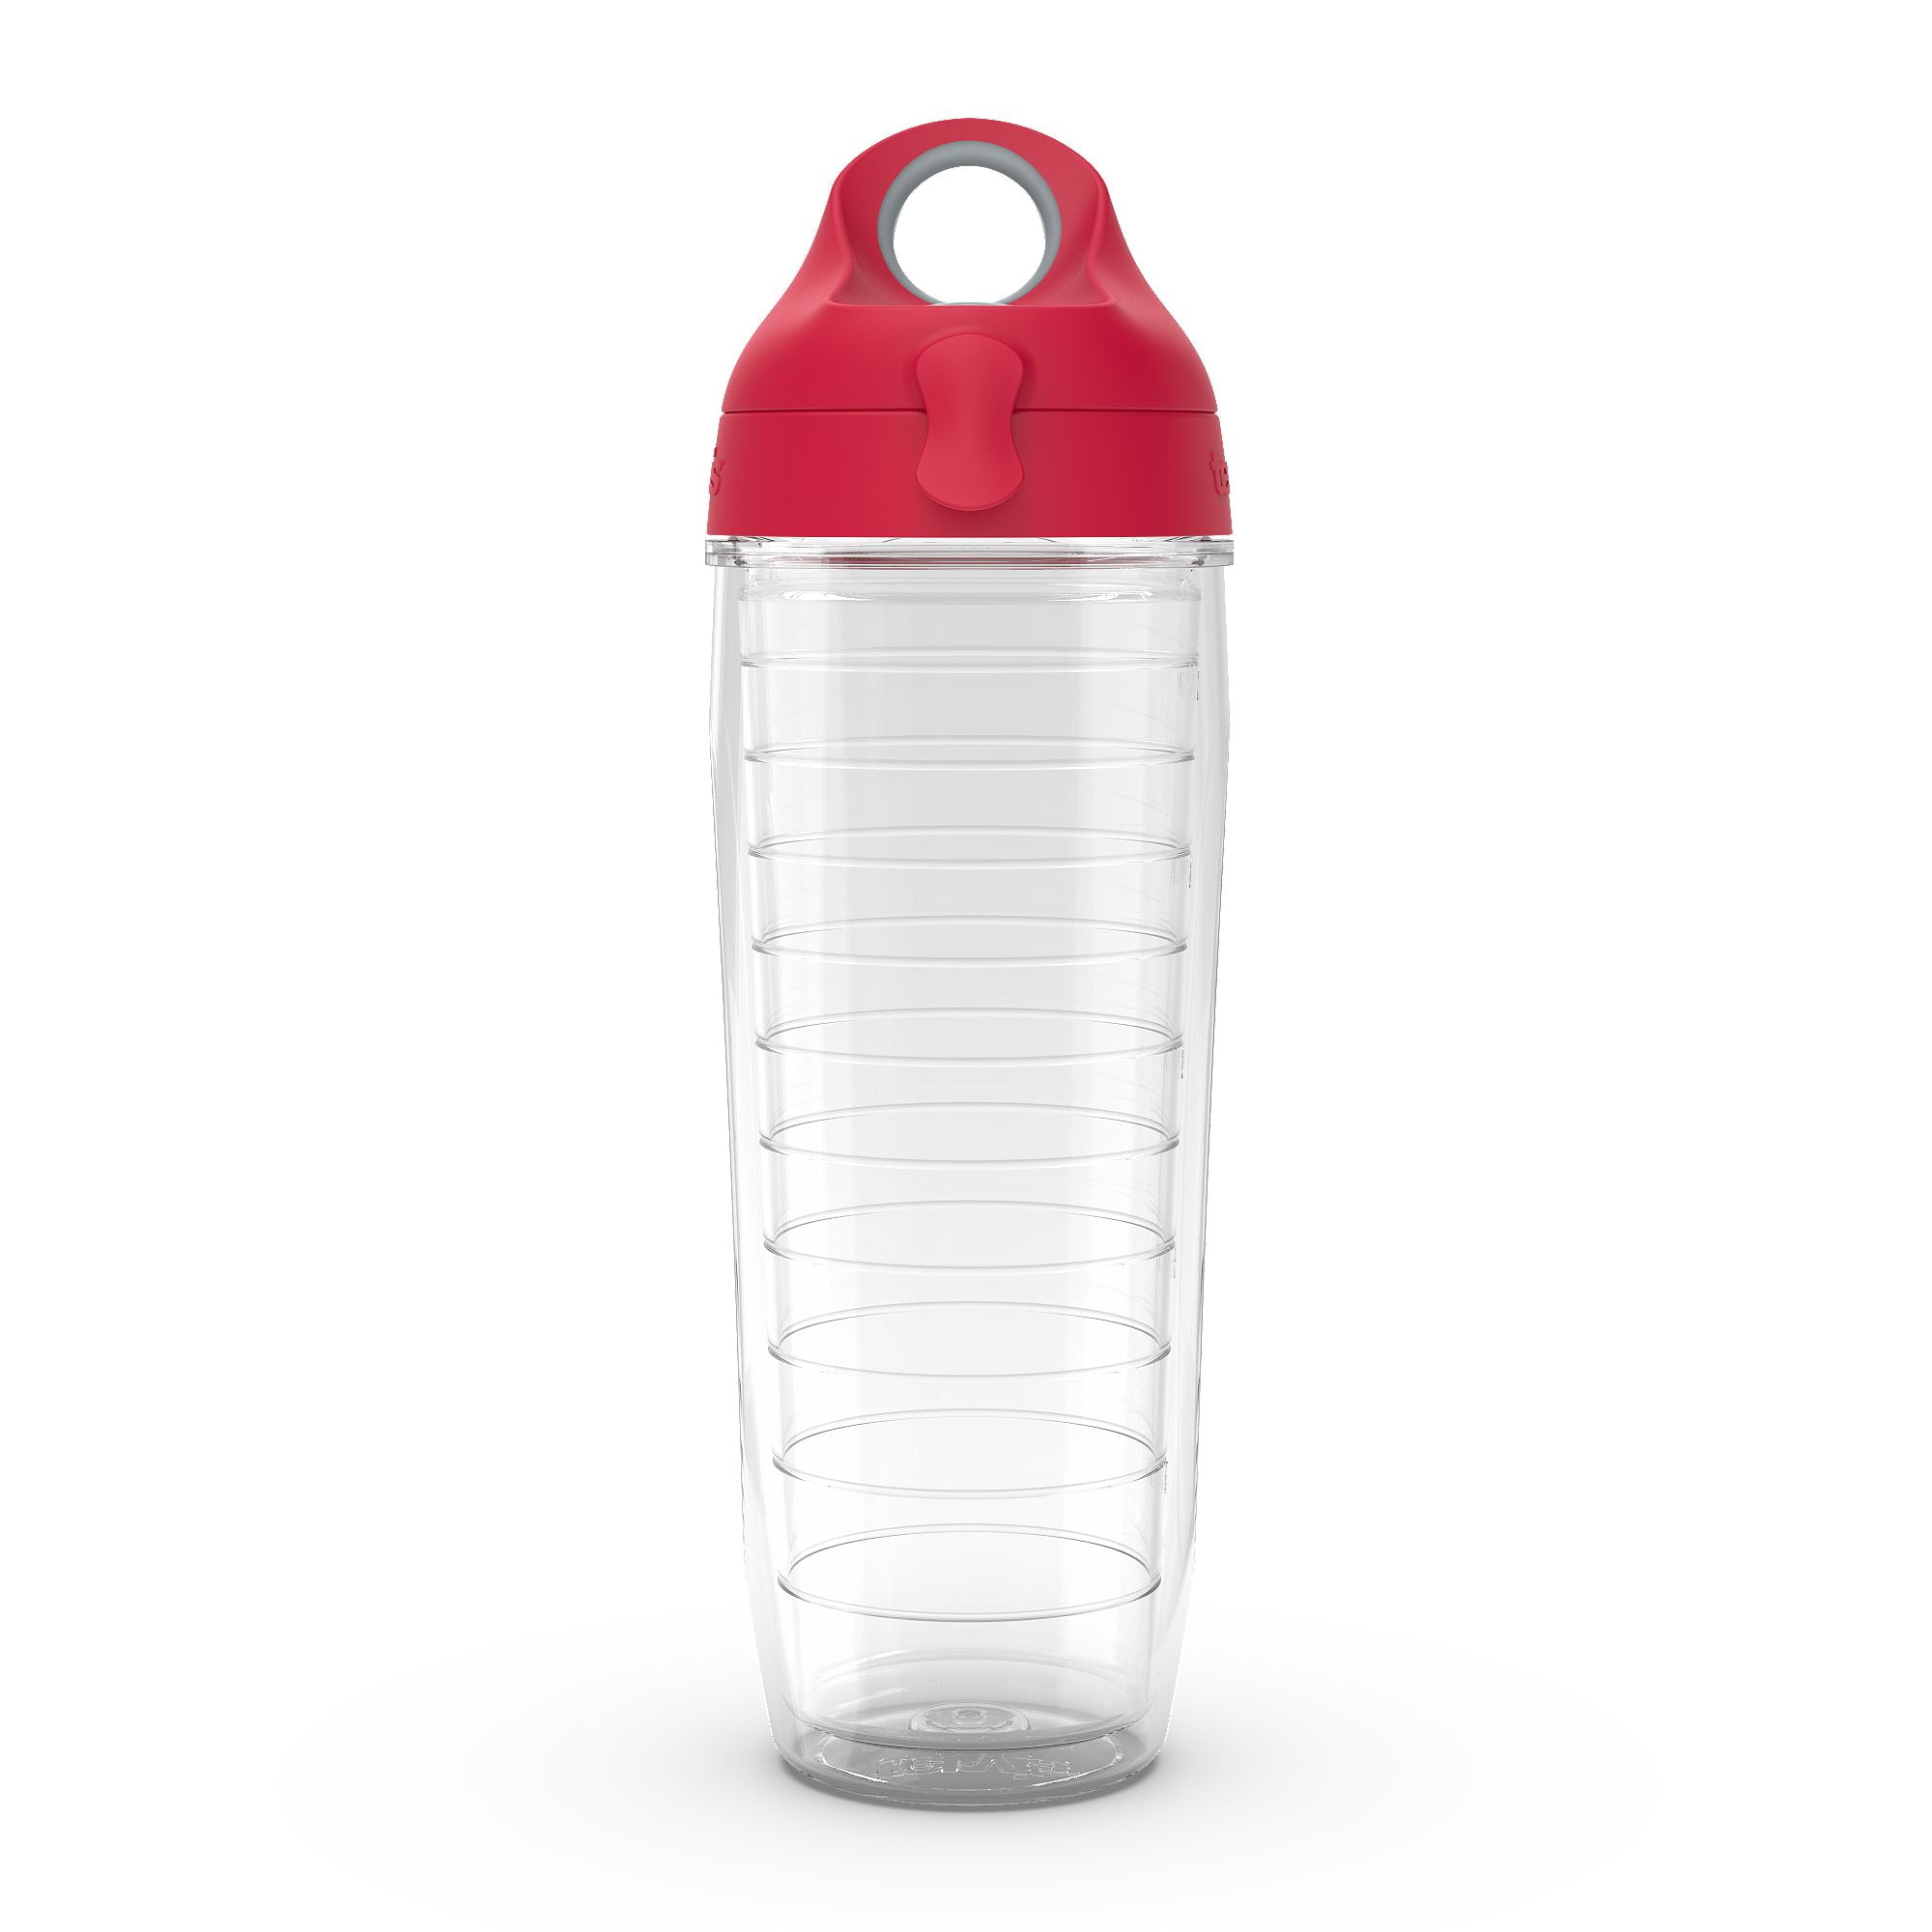  Tervis Lid, Fits 24oz Water Bottle, Red: Home & Kitchen